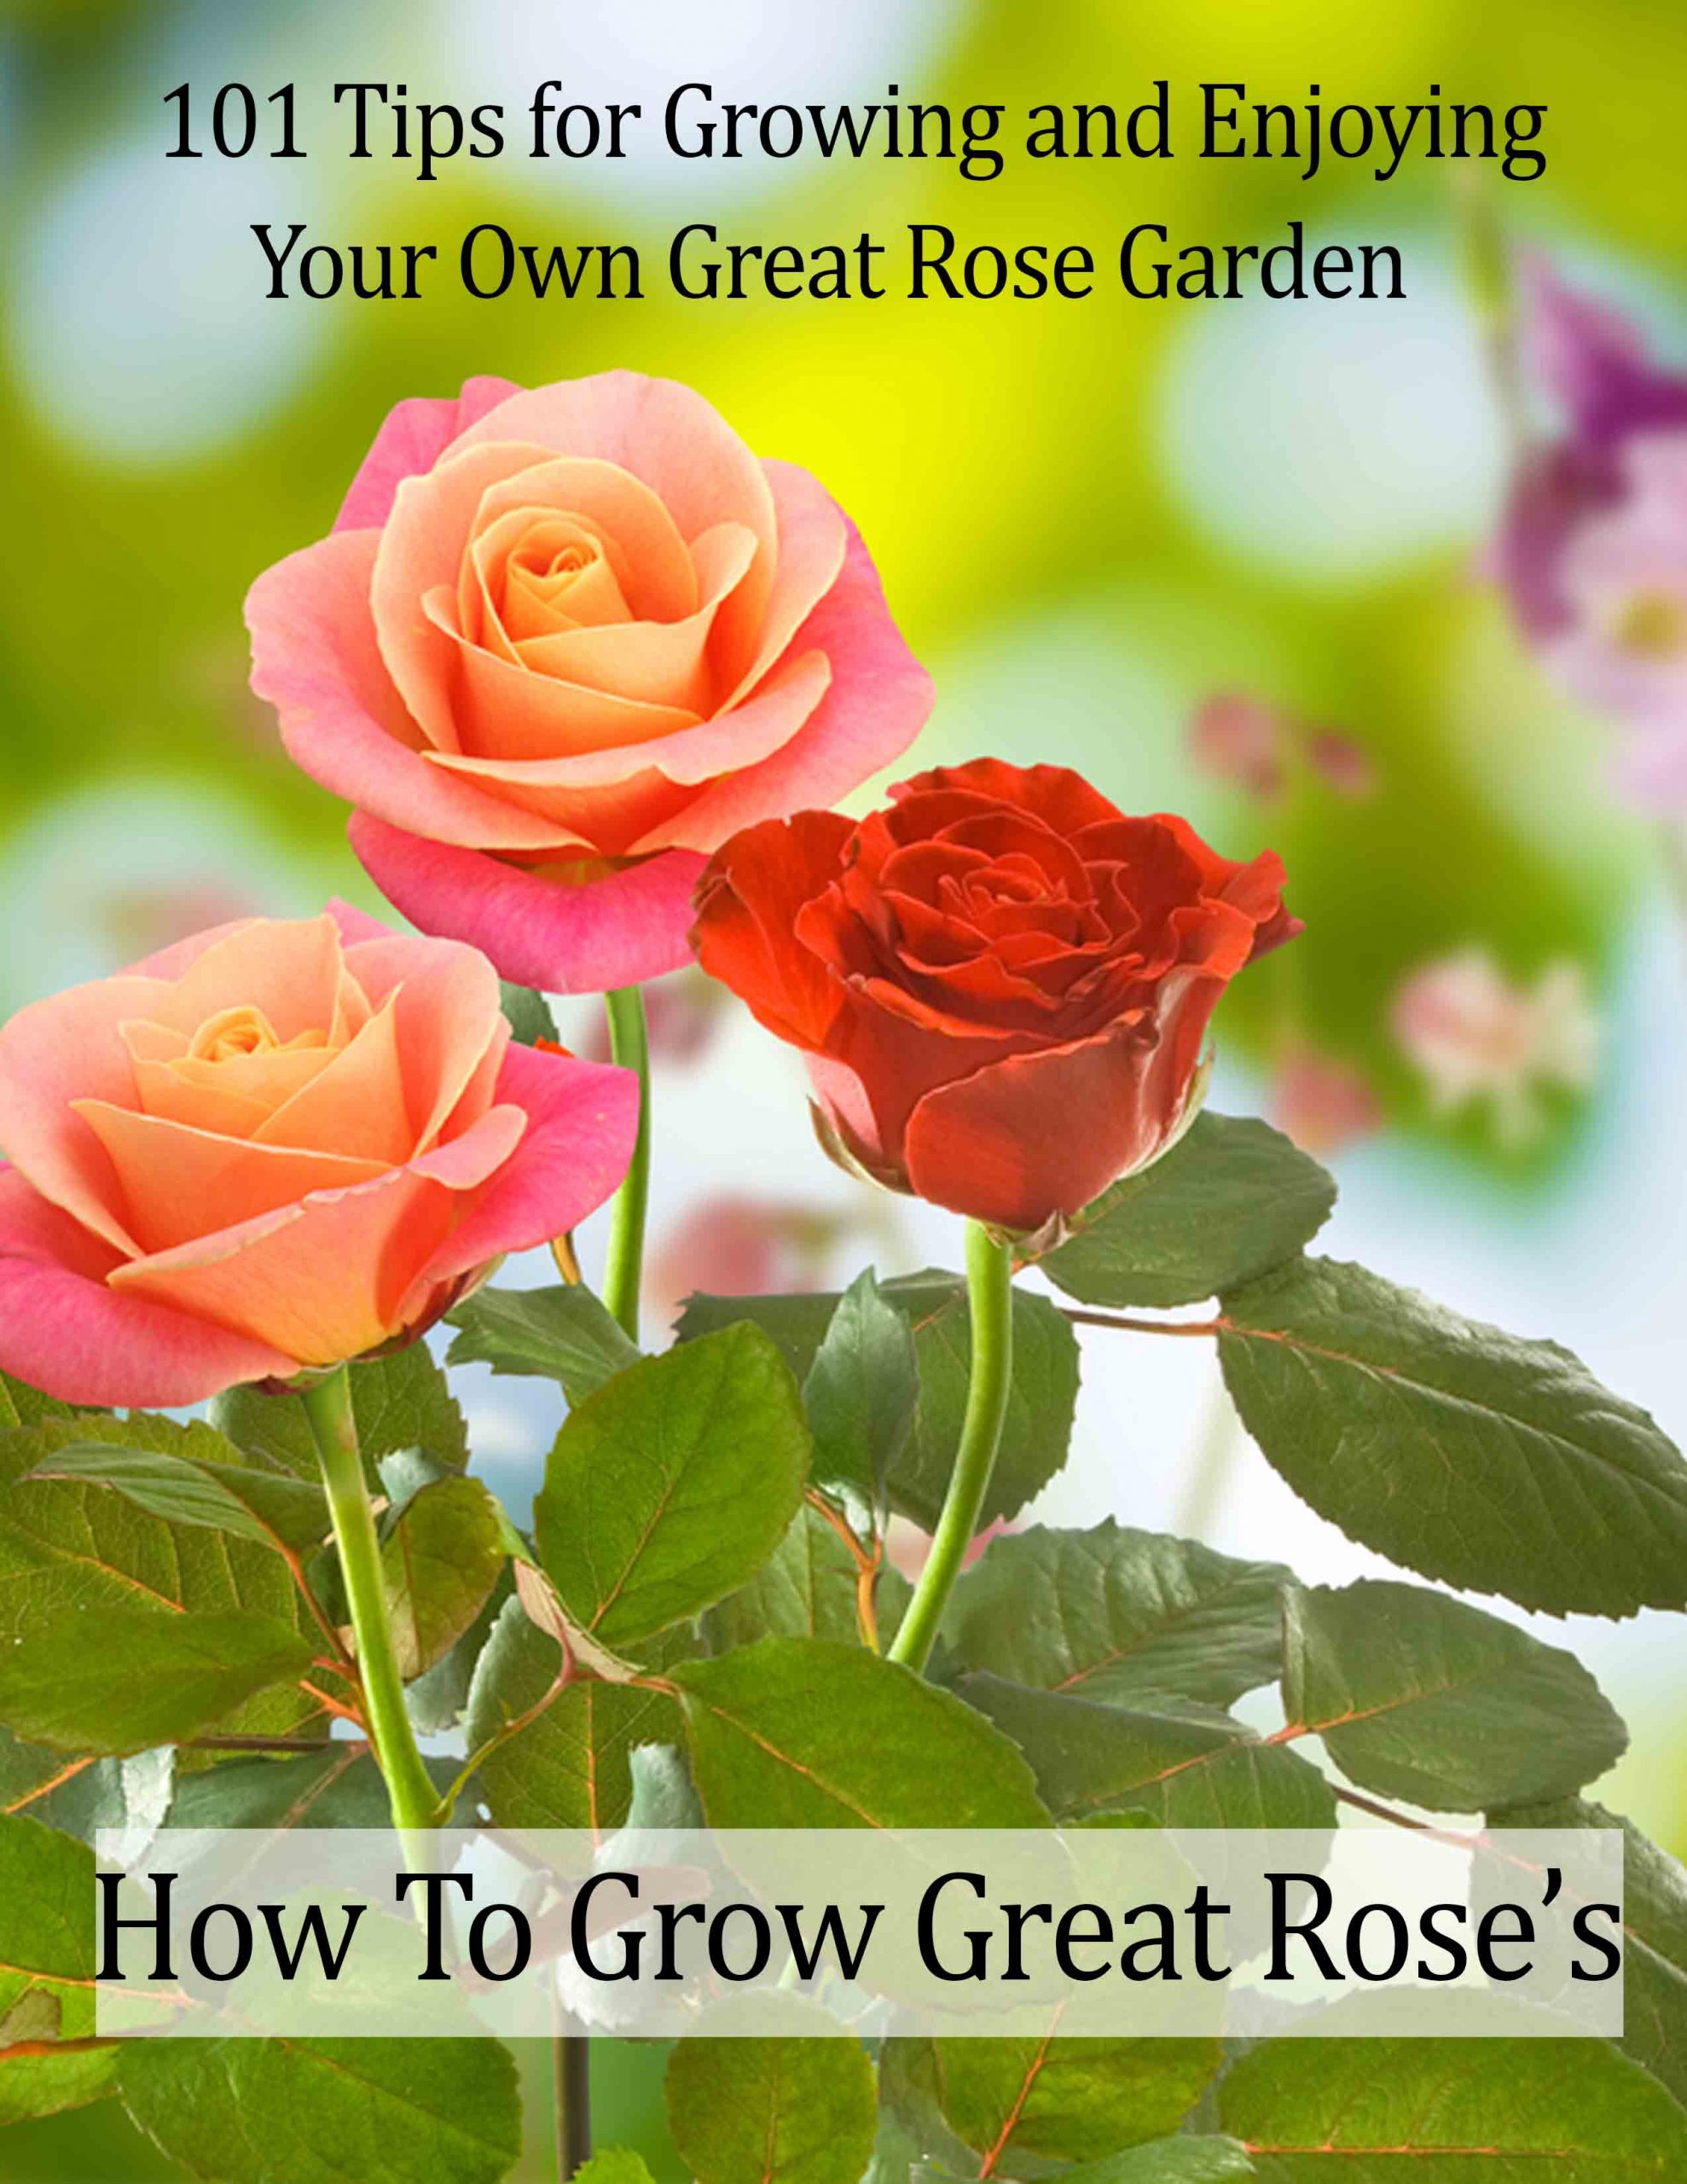 Tips for Growing and Enjoying Your Own Great Rose Garden!